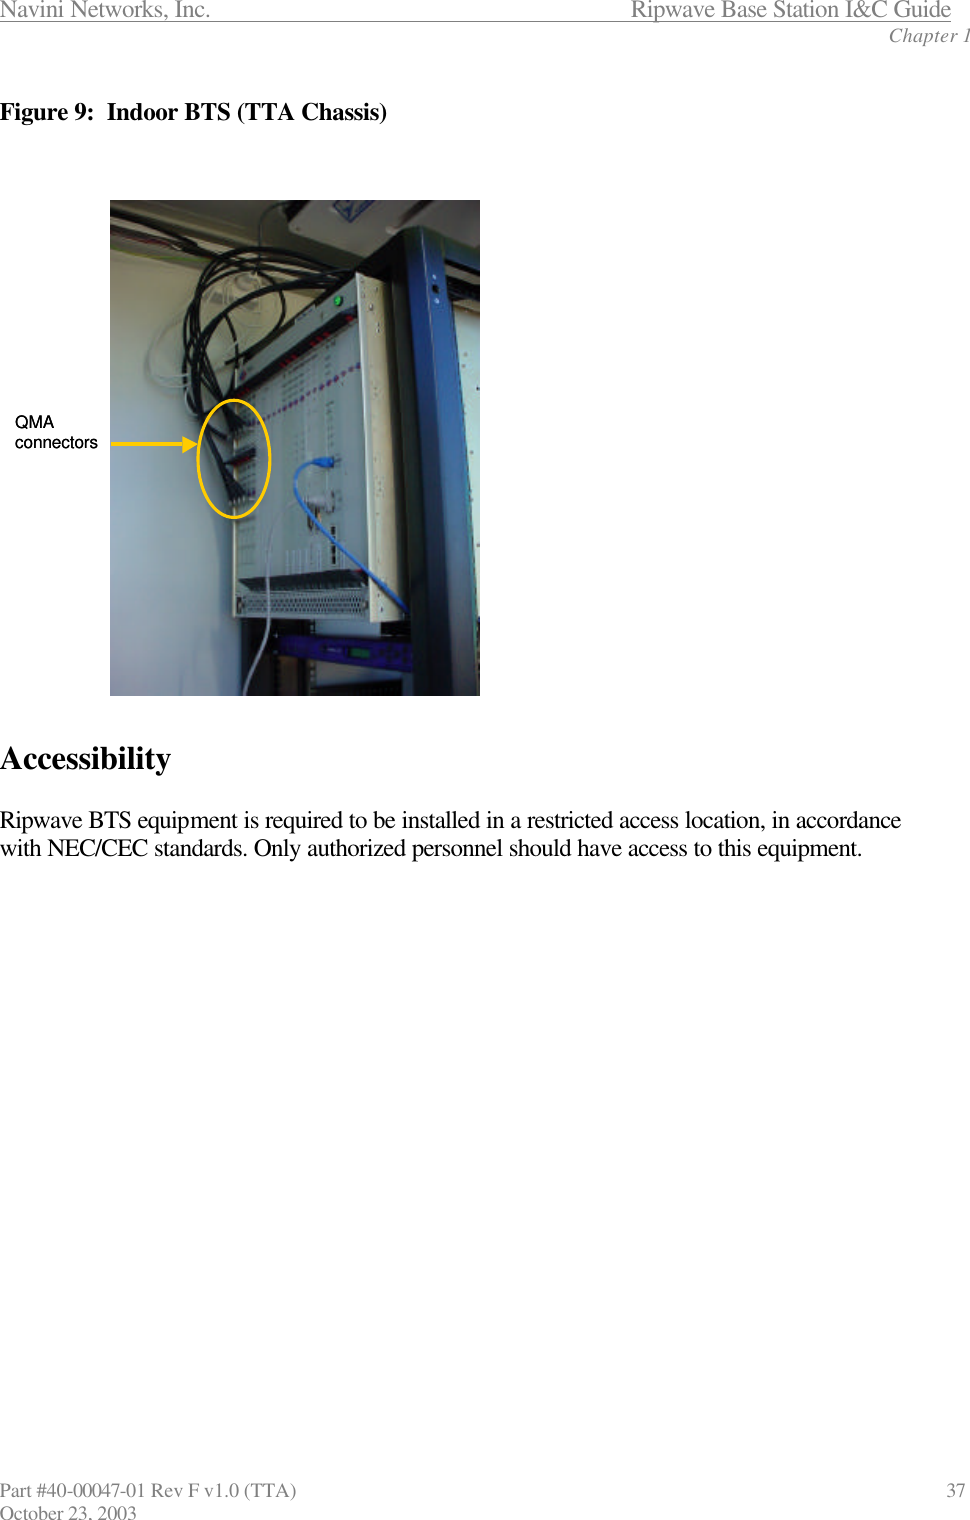 Navini Networks, Inc.                      Ripwave Base Station I&amp;C Guide Chapter 1 Part #40-00047-01 Rev F v1.0 (TTA)                               37 October 23, 2003  Figure 9:  Indoor BTS (TTA Chassis)    Accessibility  Ripwave BTS equipment is required to be installed in a restricted access location, in accordance with NEC/CEC standards. Only authorized personnel should have access to this equipment.   QMA connectorsQMA connectors